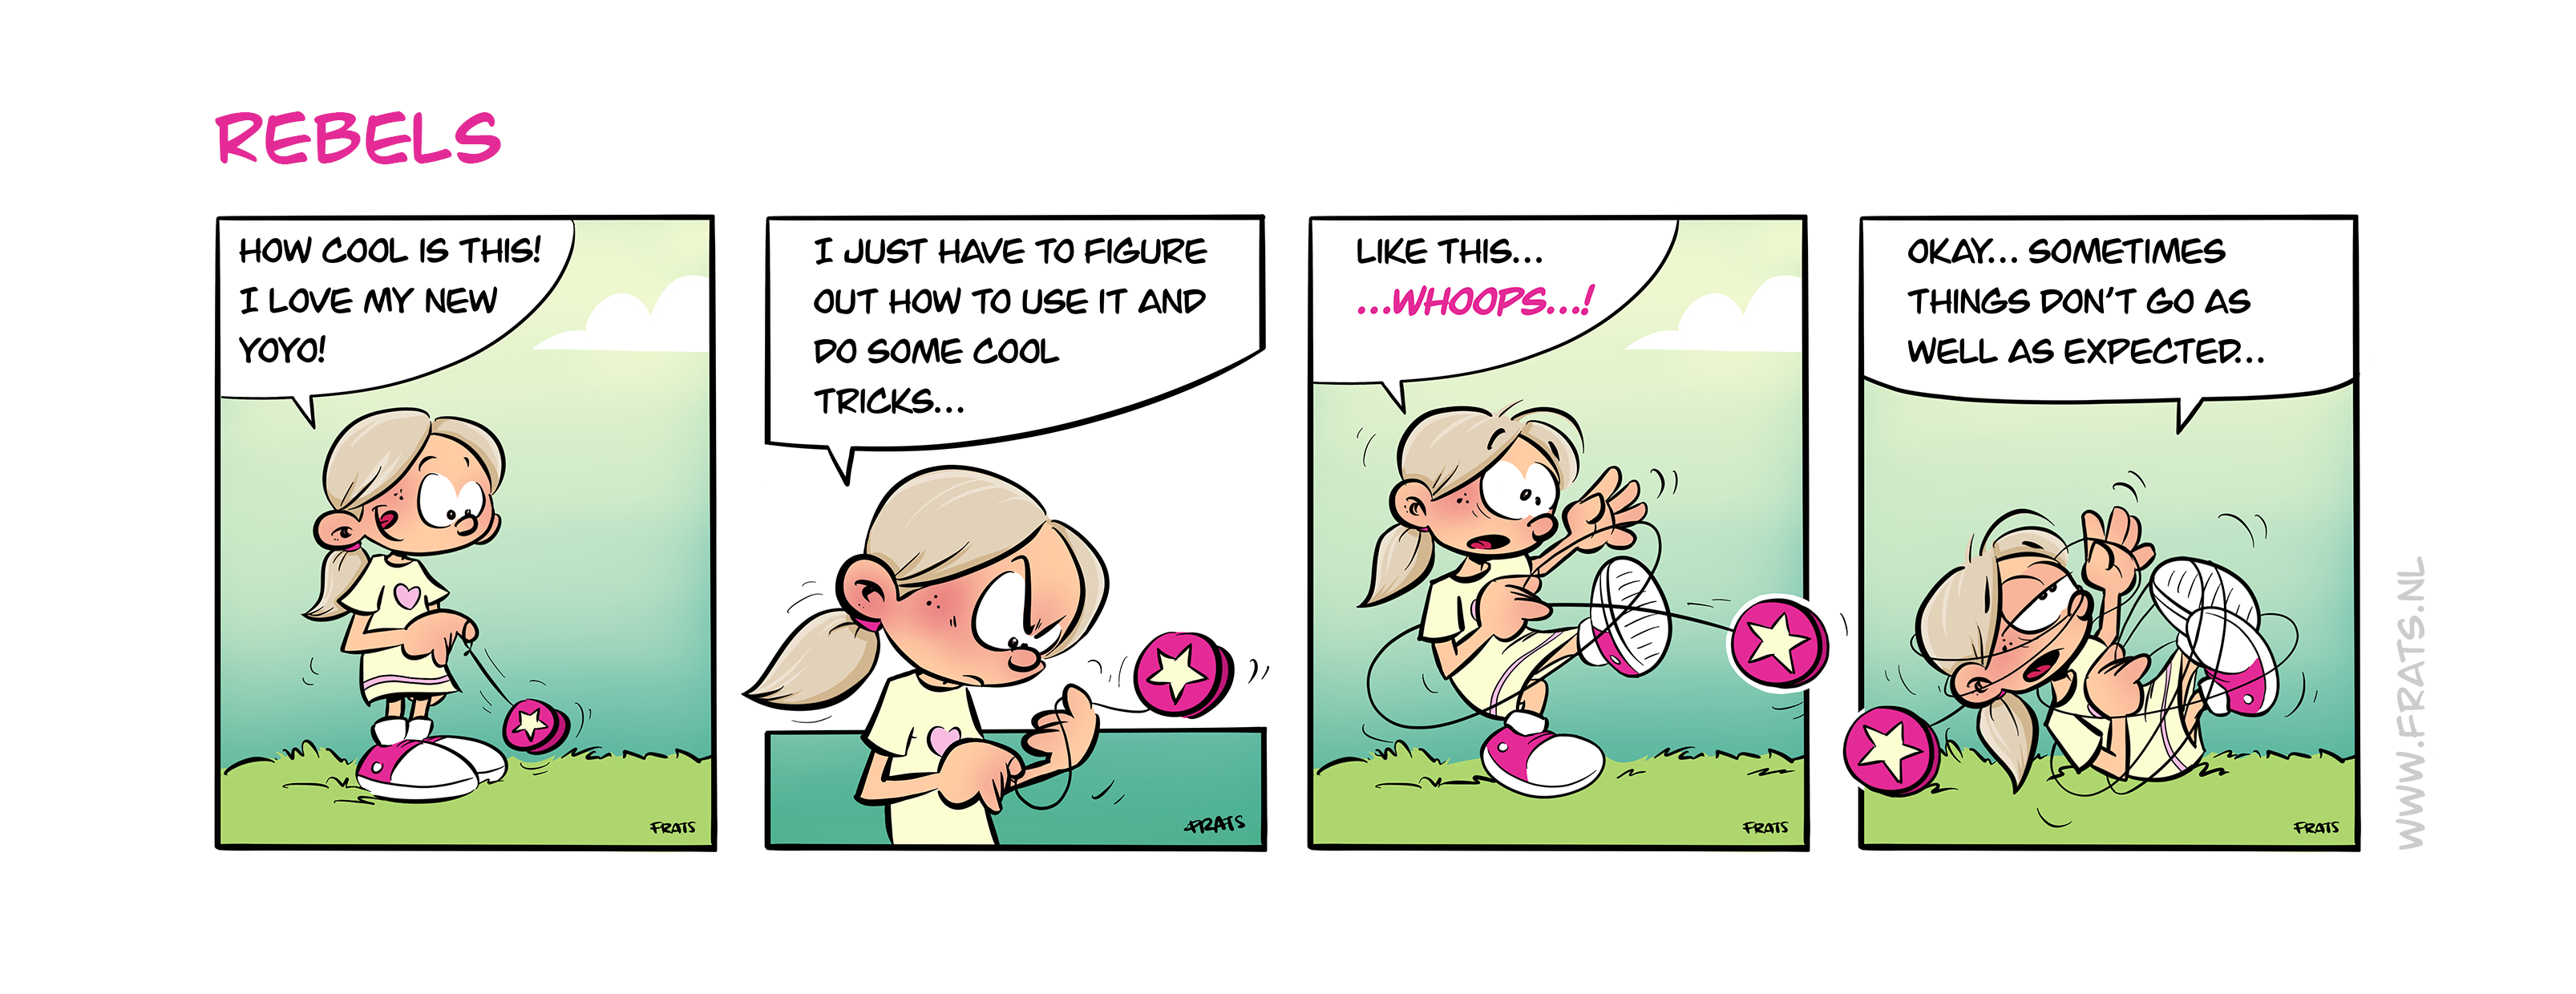 Rebels comic strip about playing with a yoyo